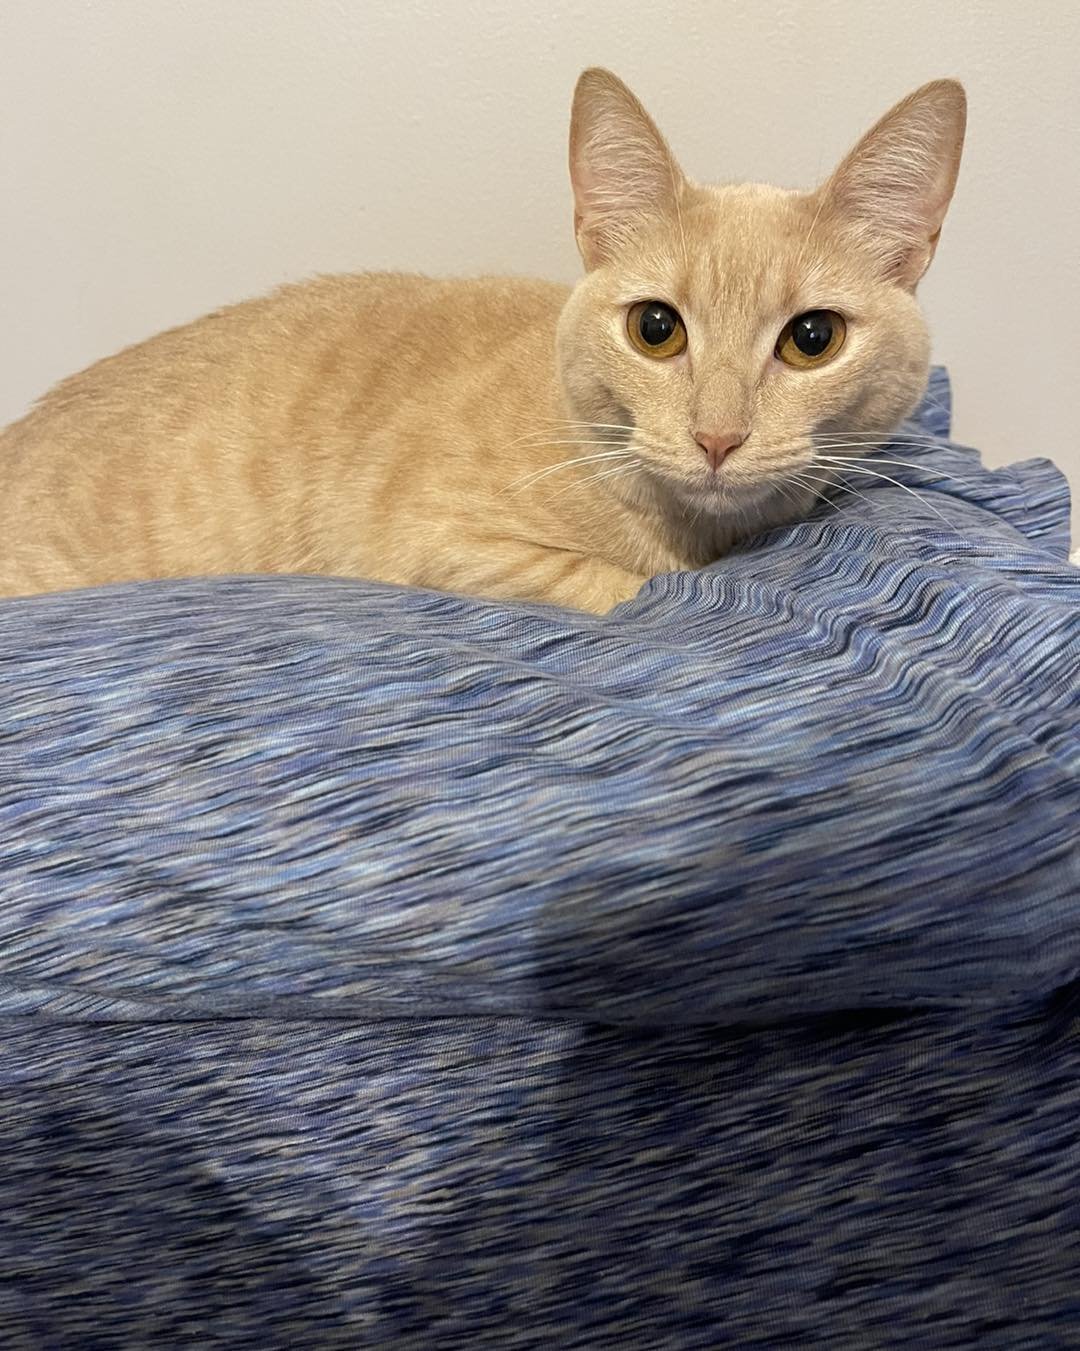 Check me-owt! 

It has been awhile since we have had any feline friends looking for a furever home 🐱

Chili is a sweet but shy girl that is around 2 years old. She loves to lay in a window, snacks and cuddles. She is great with kids but does not par